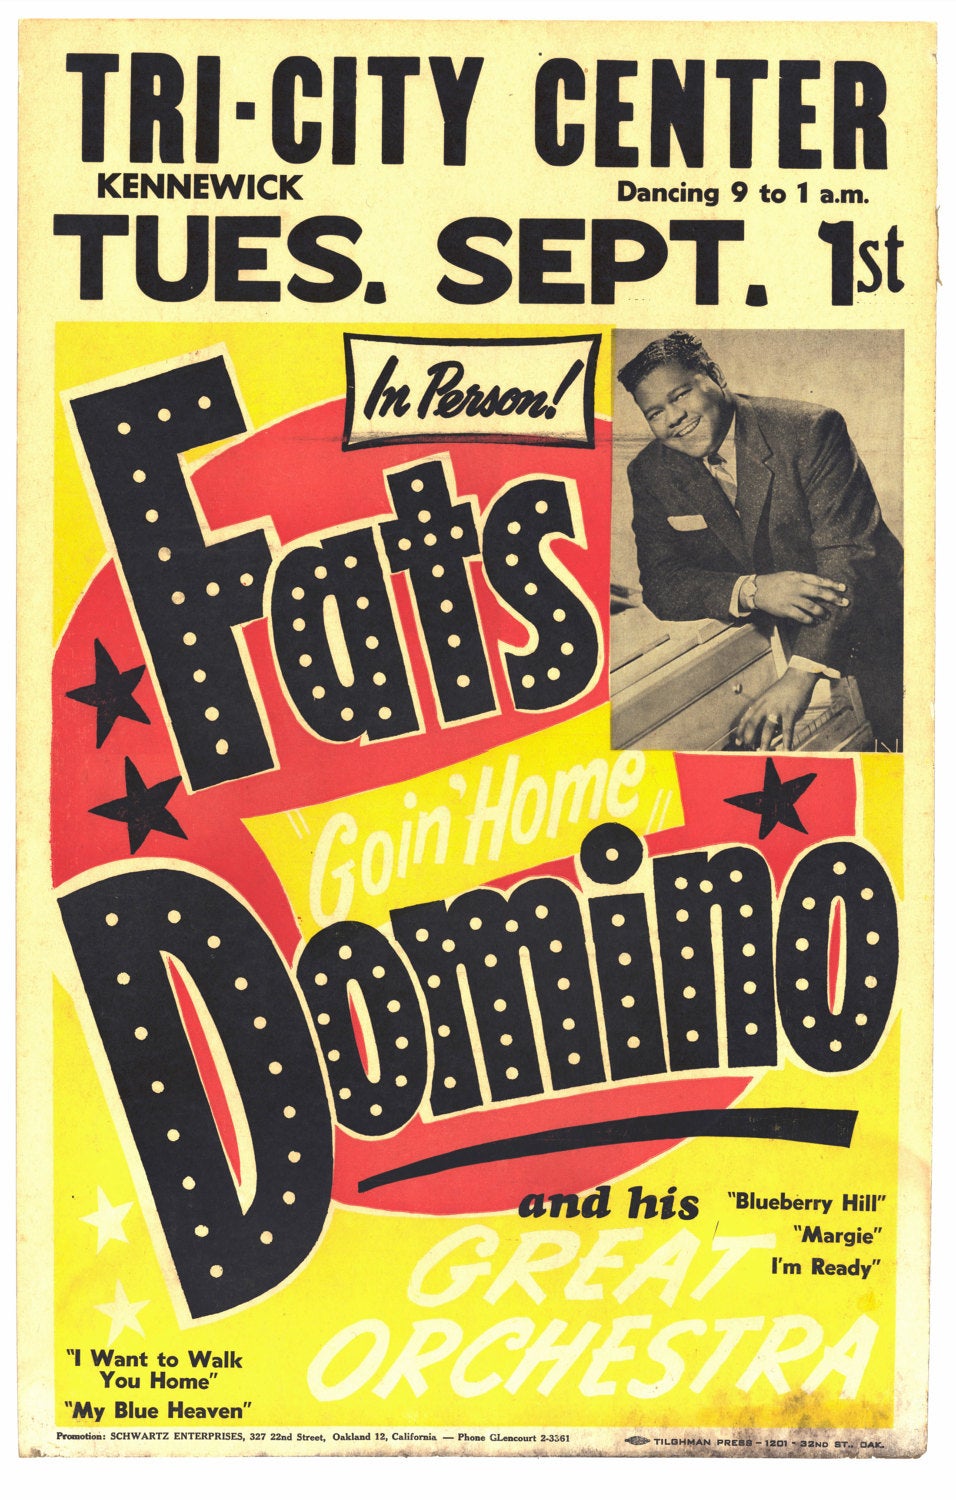 Vintage Music Art Poster - Fats Domino - 0347